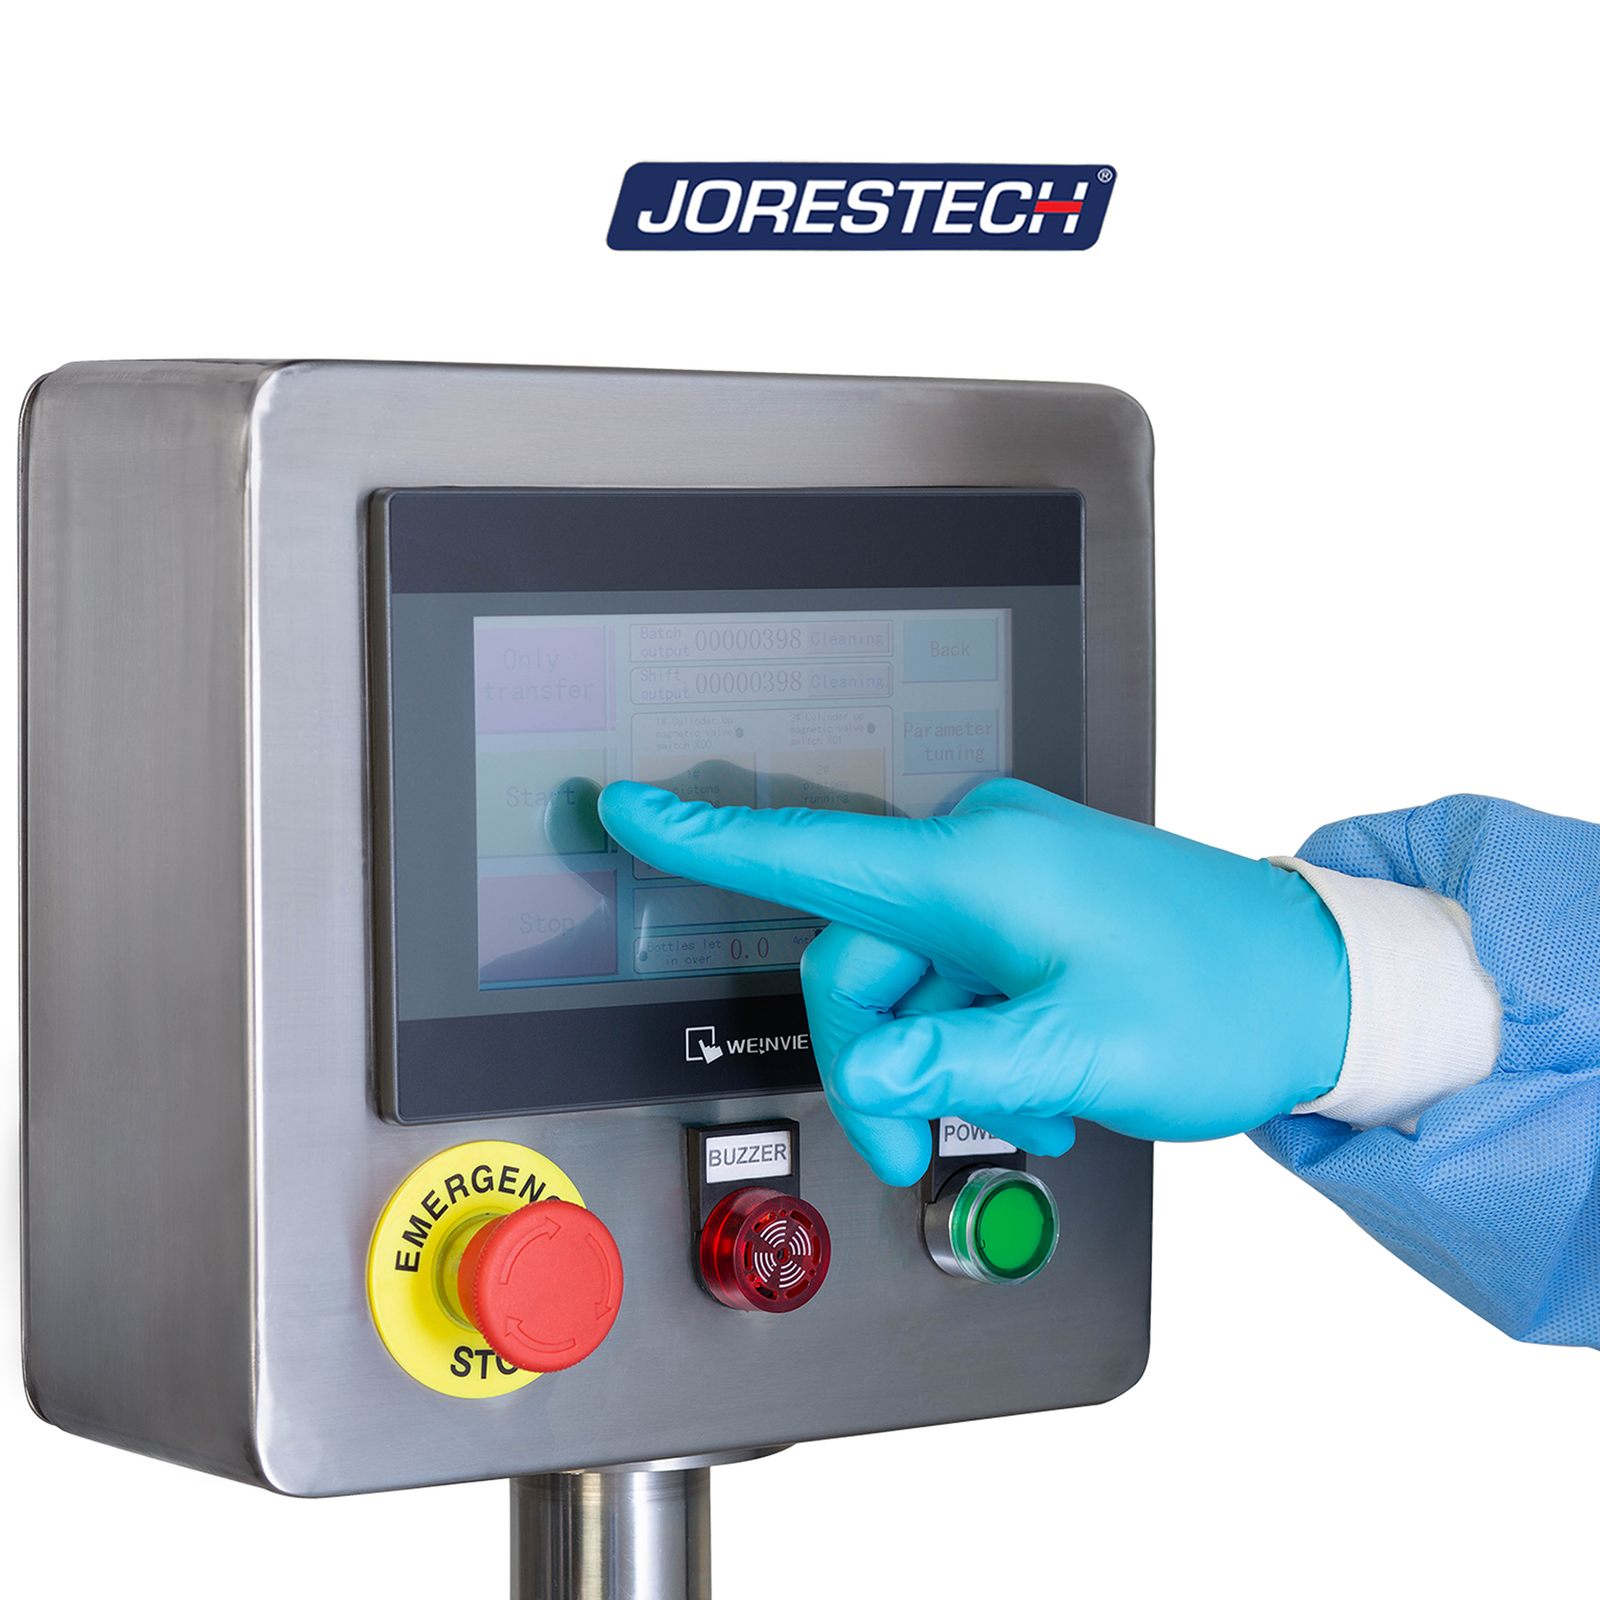 The hand of a person with nitrile gloves setting the machine on the user friendly digital control panel 